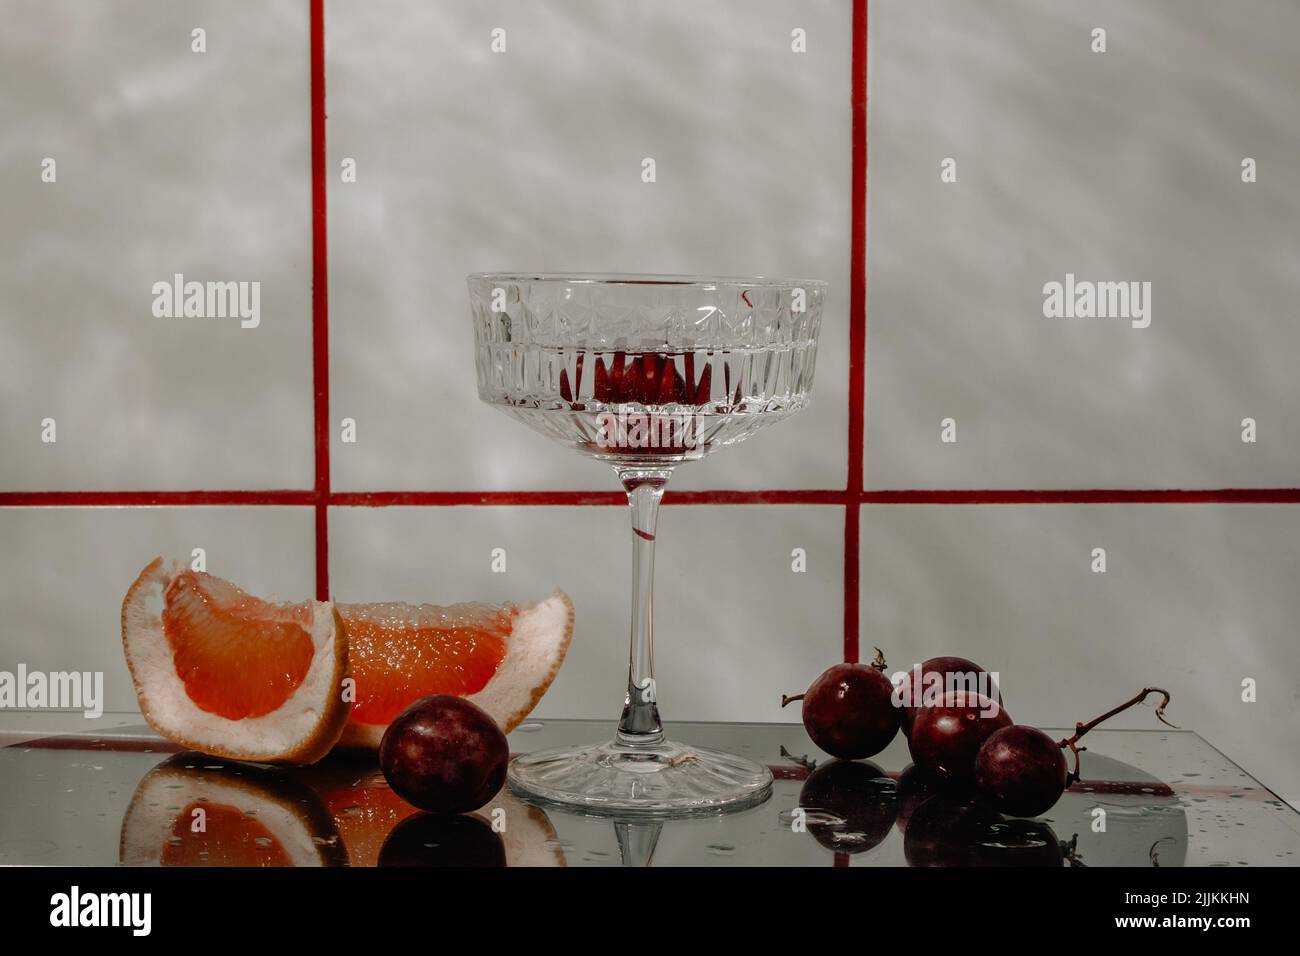 Crystal glass for cocktails on a glass surface. Fruits - grapes, grapefruit next to the glass. Abstract background. Stock Photo